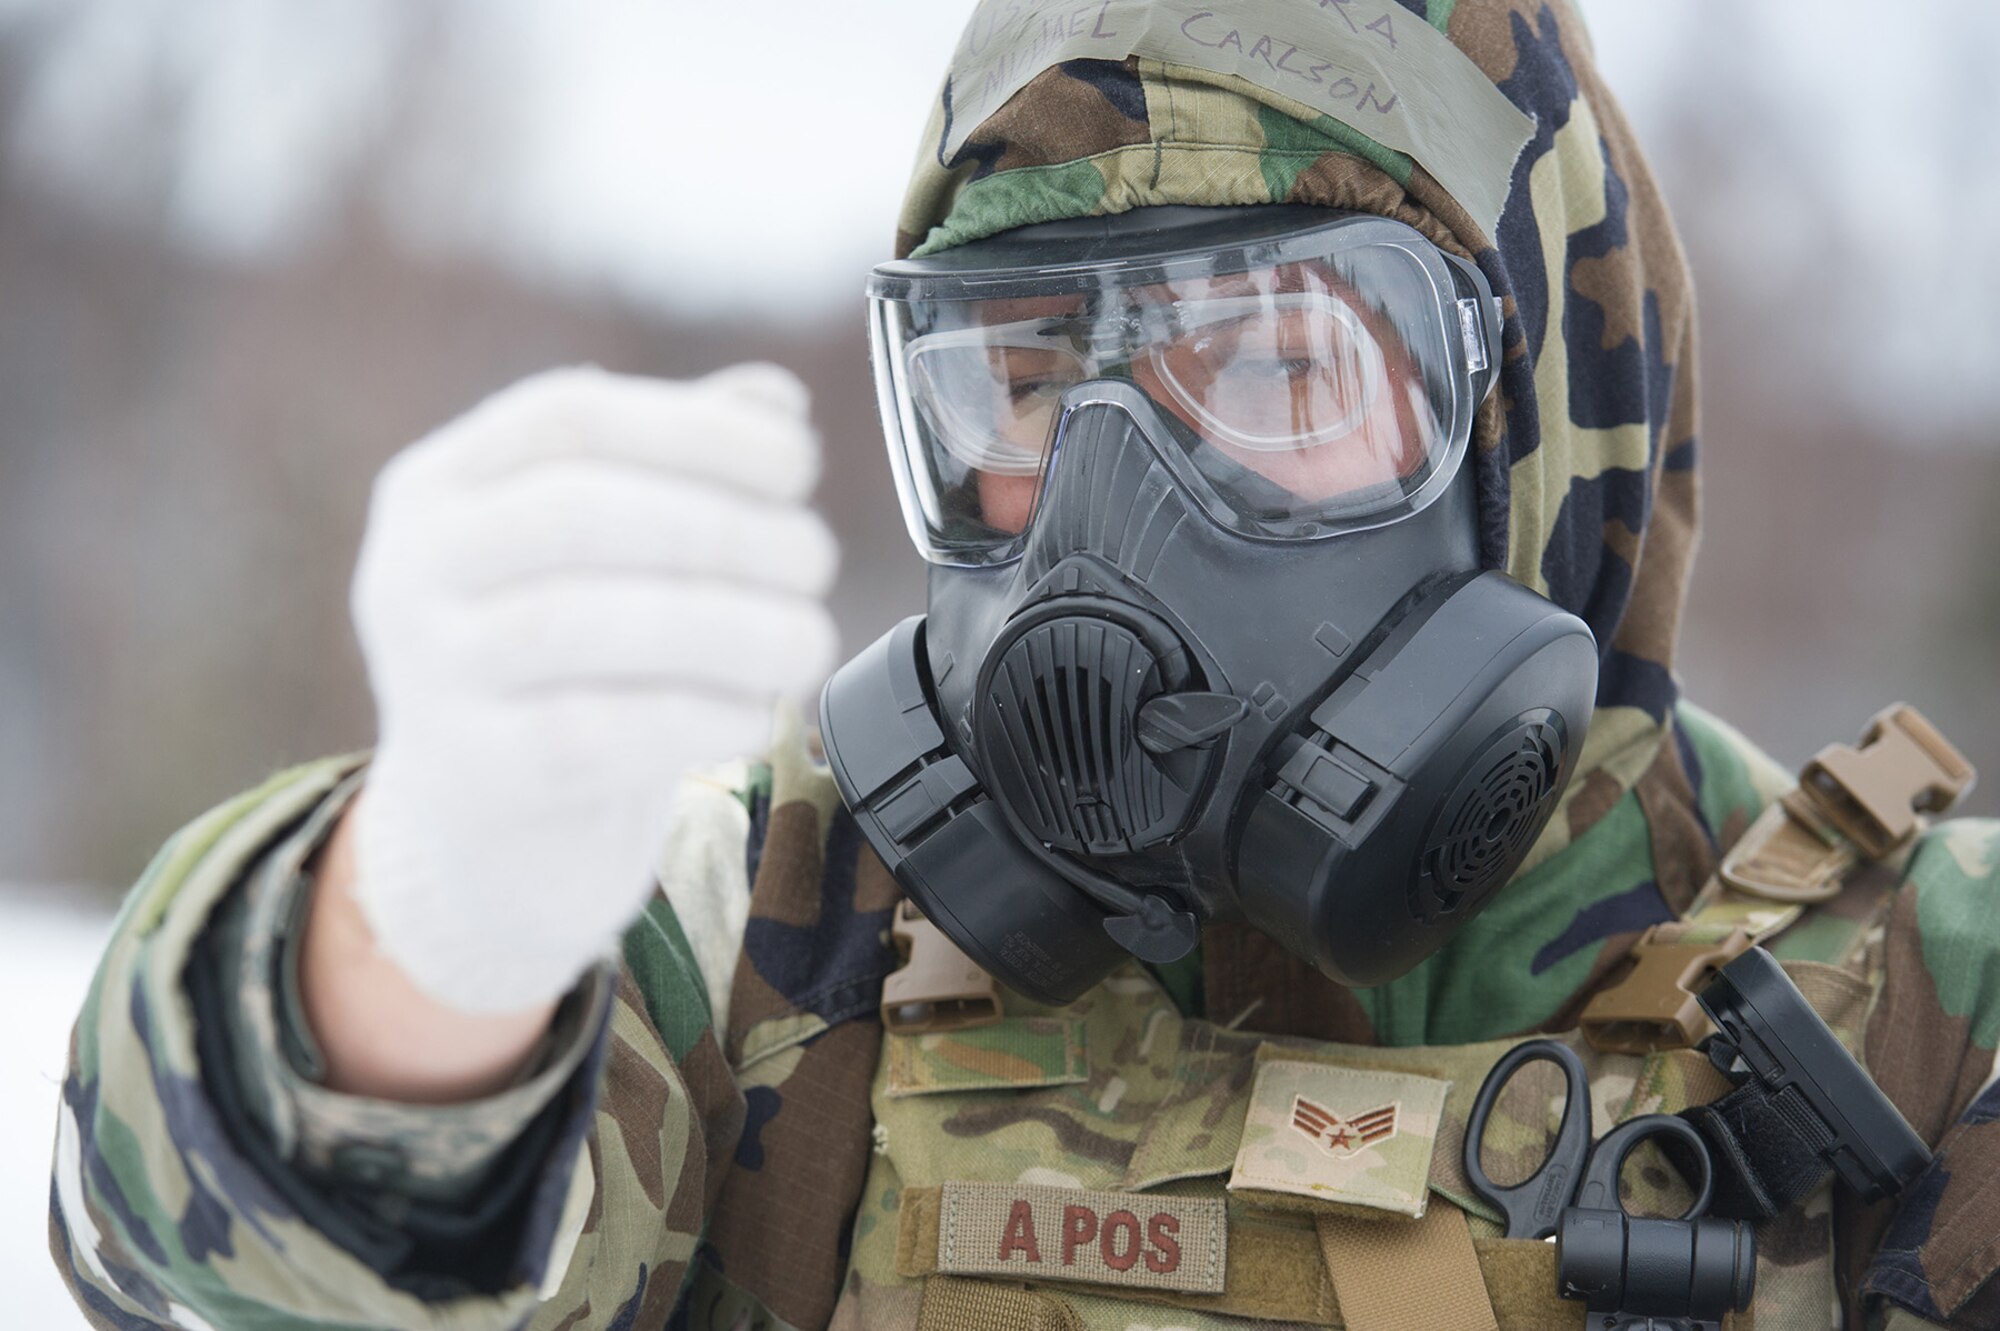 Senior Airman Michael Carlson, assigned to the 673d Civil Engineer Squadron, Explosives Ordinance Disposal Flight, quickly dons protective gear before a live-fire demolitions exercise in Mission Oriented Protective Posture 4 on Joint Base Elmendorf-Richardson, Alaska, Feb.14, 2018.  The Airmen were conducting EOD training in a simulated chemical weapons contaminated environment.